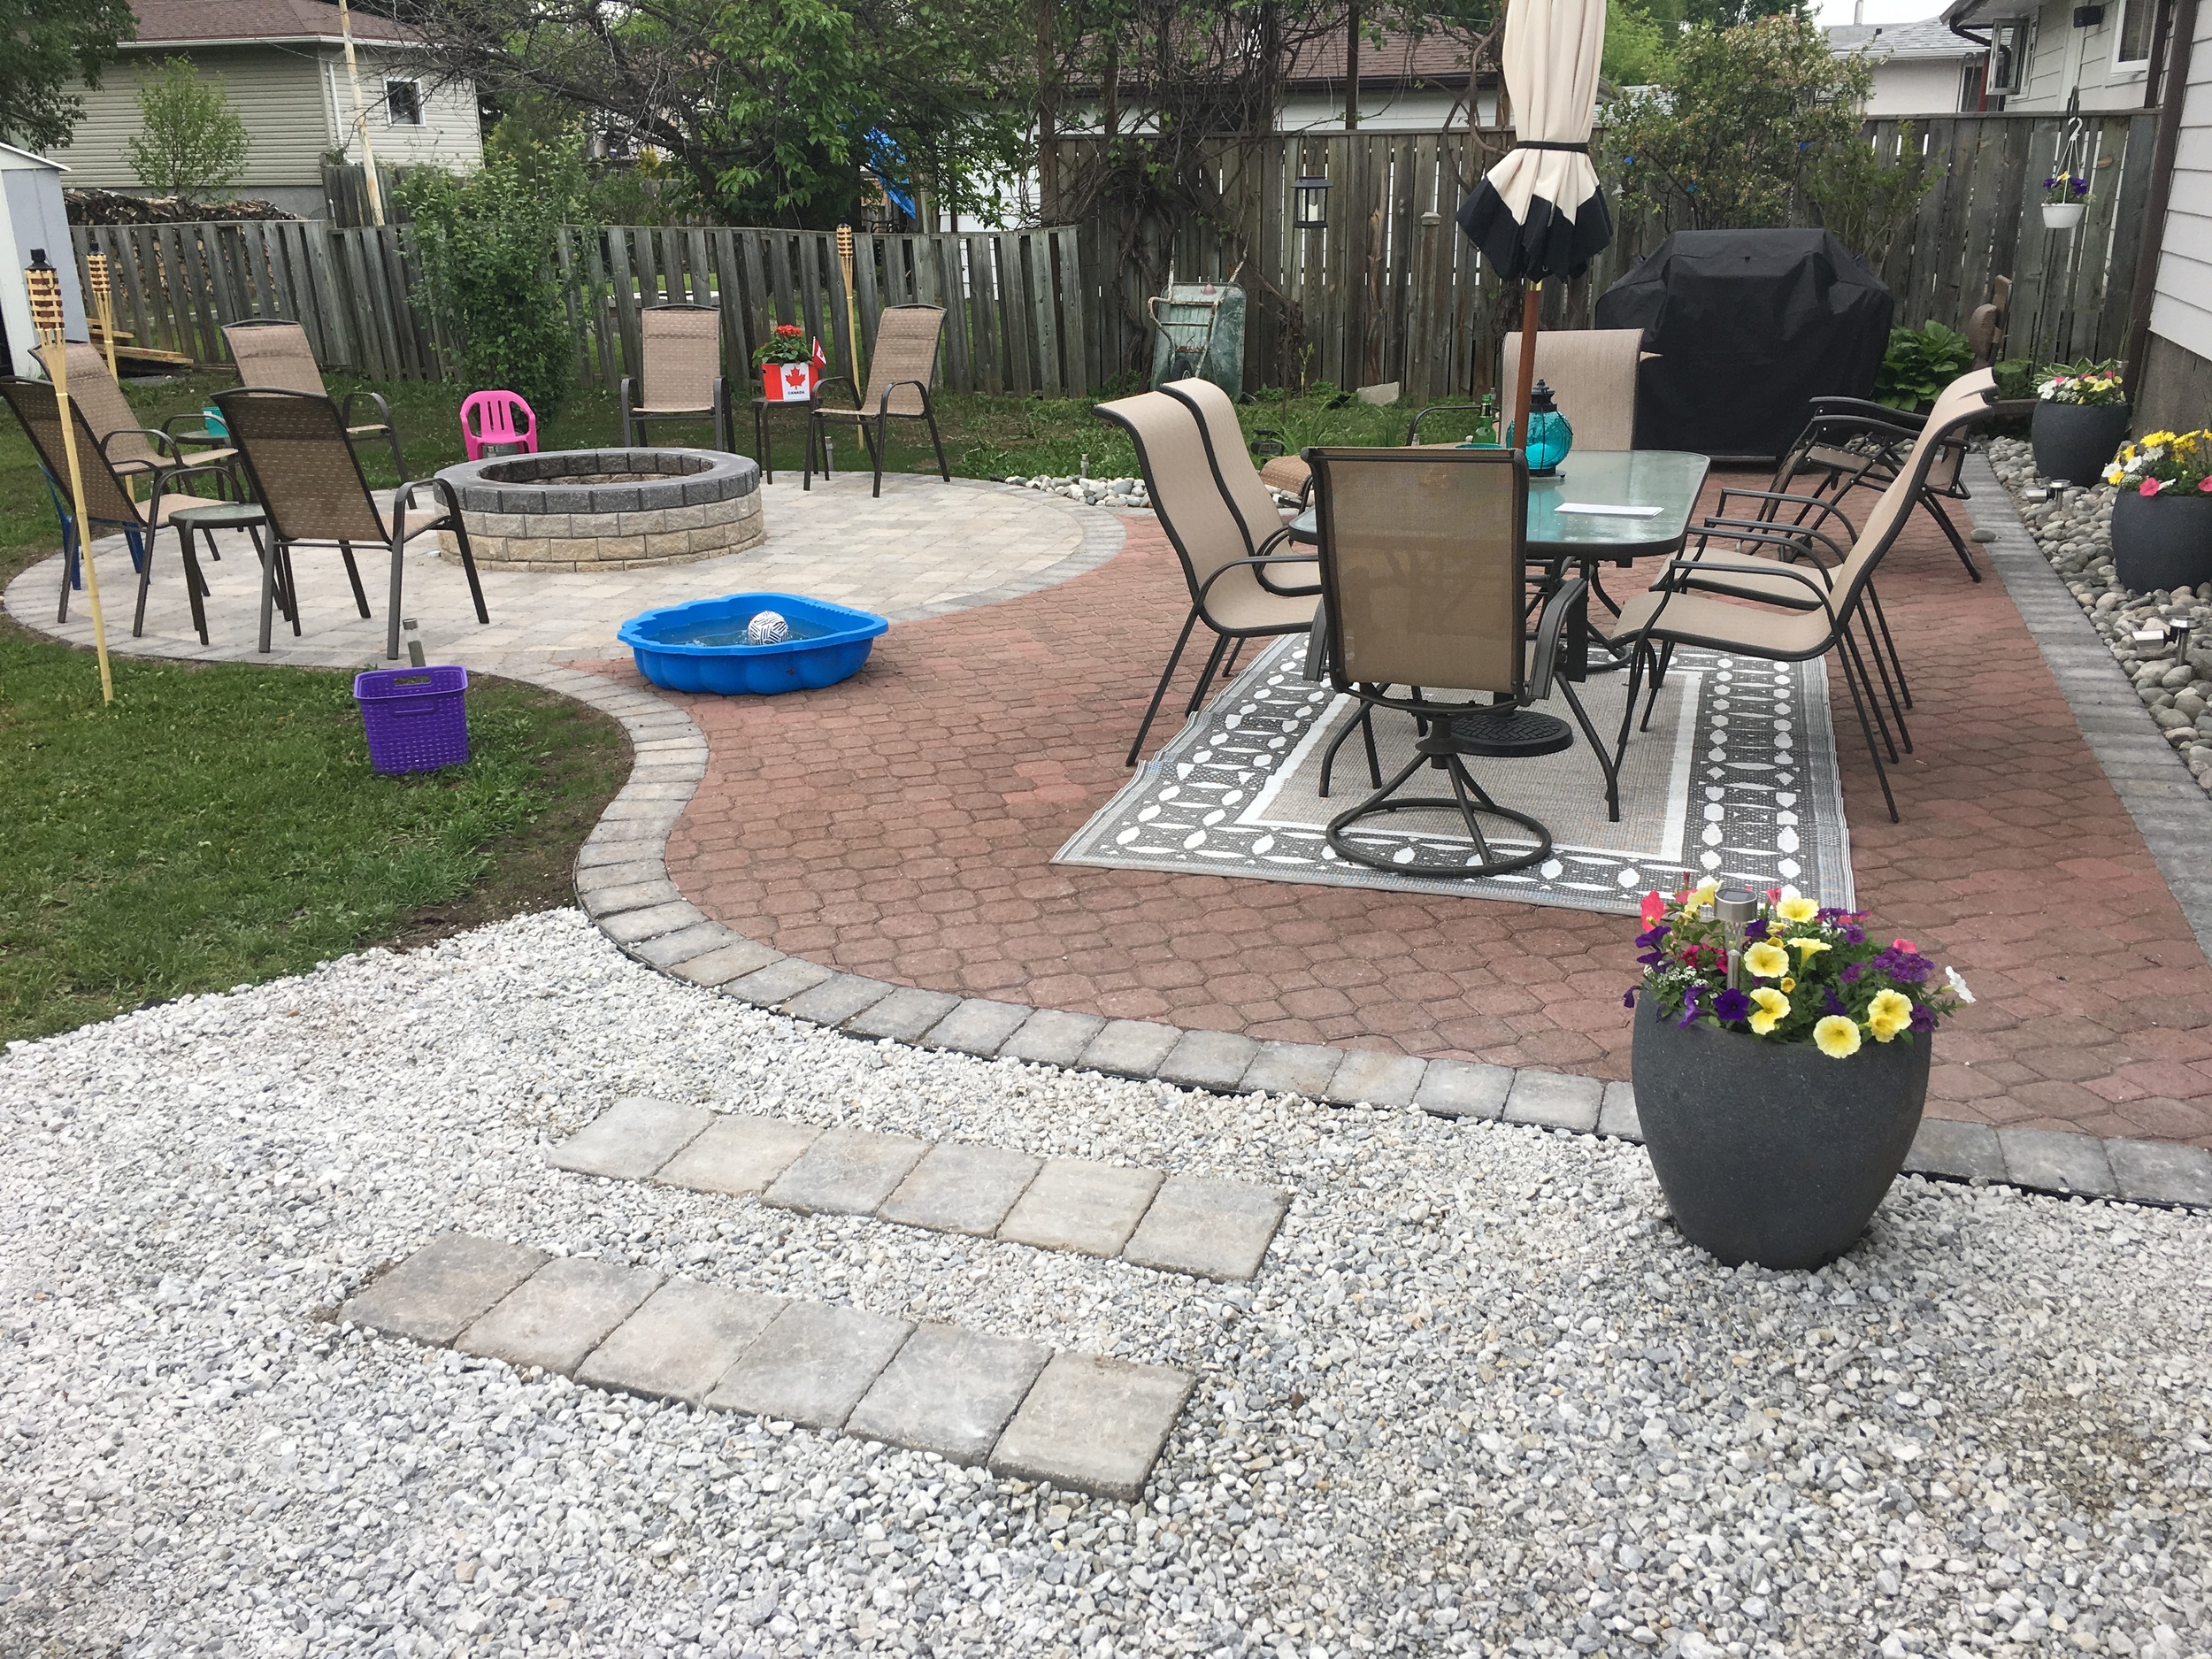 Roman Circle Patio/Fire Pit mixed with older style stone